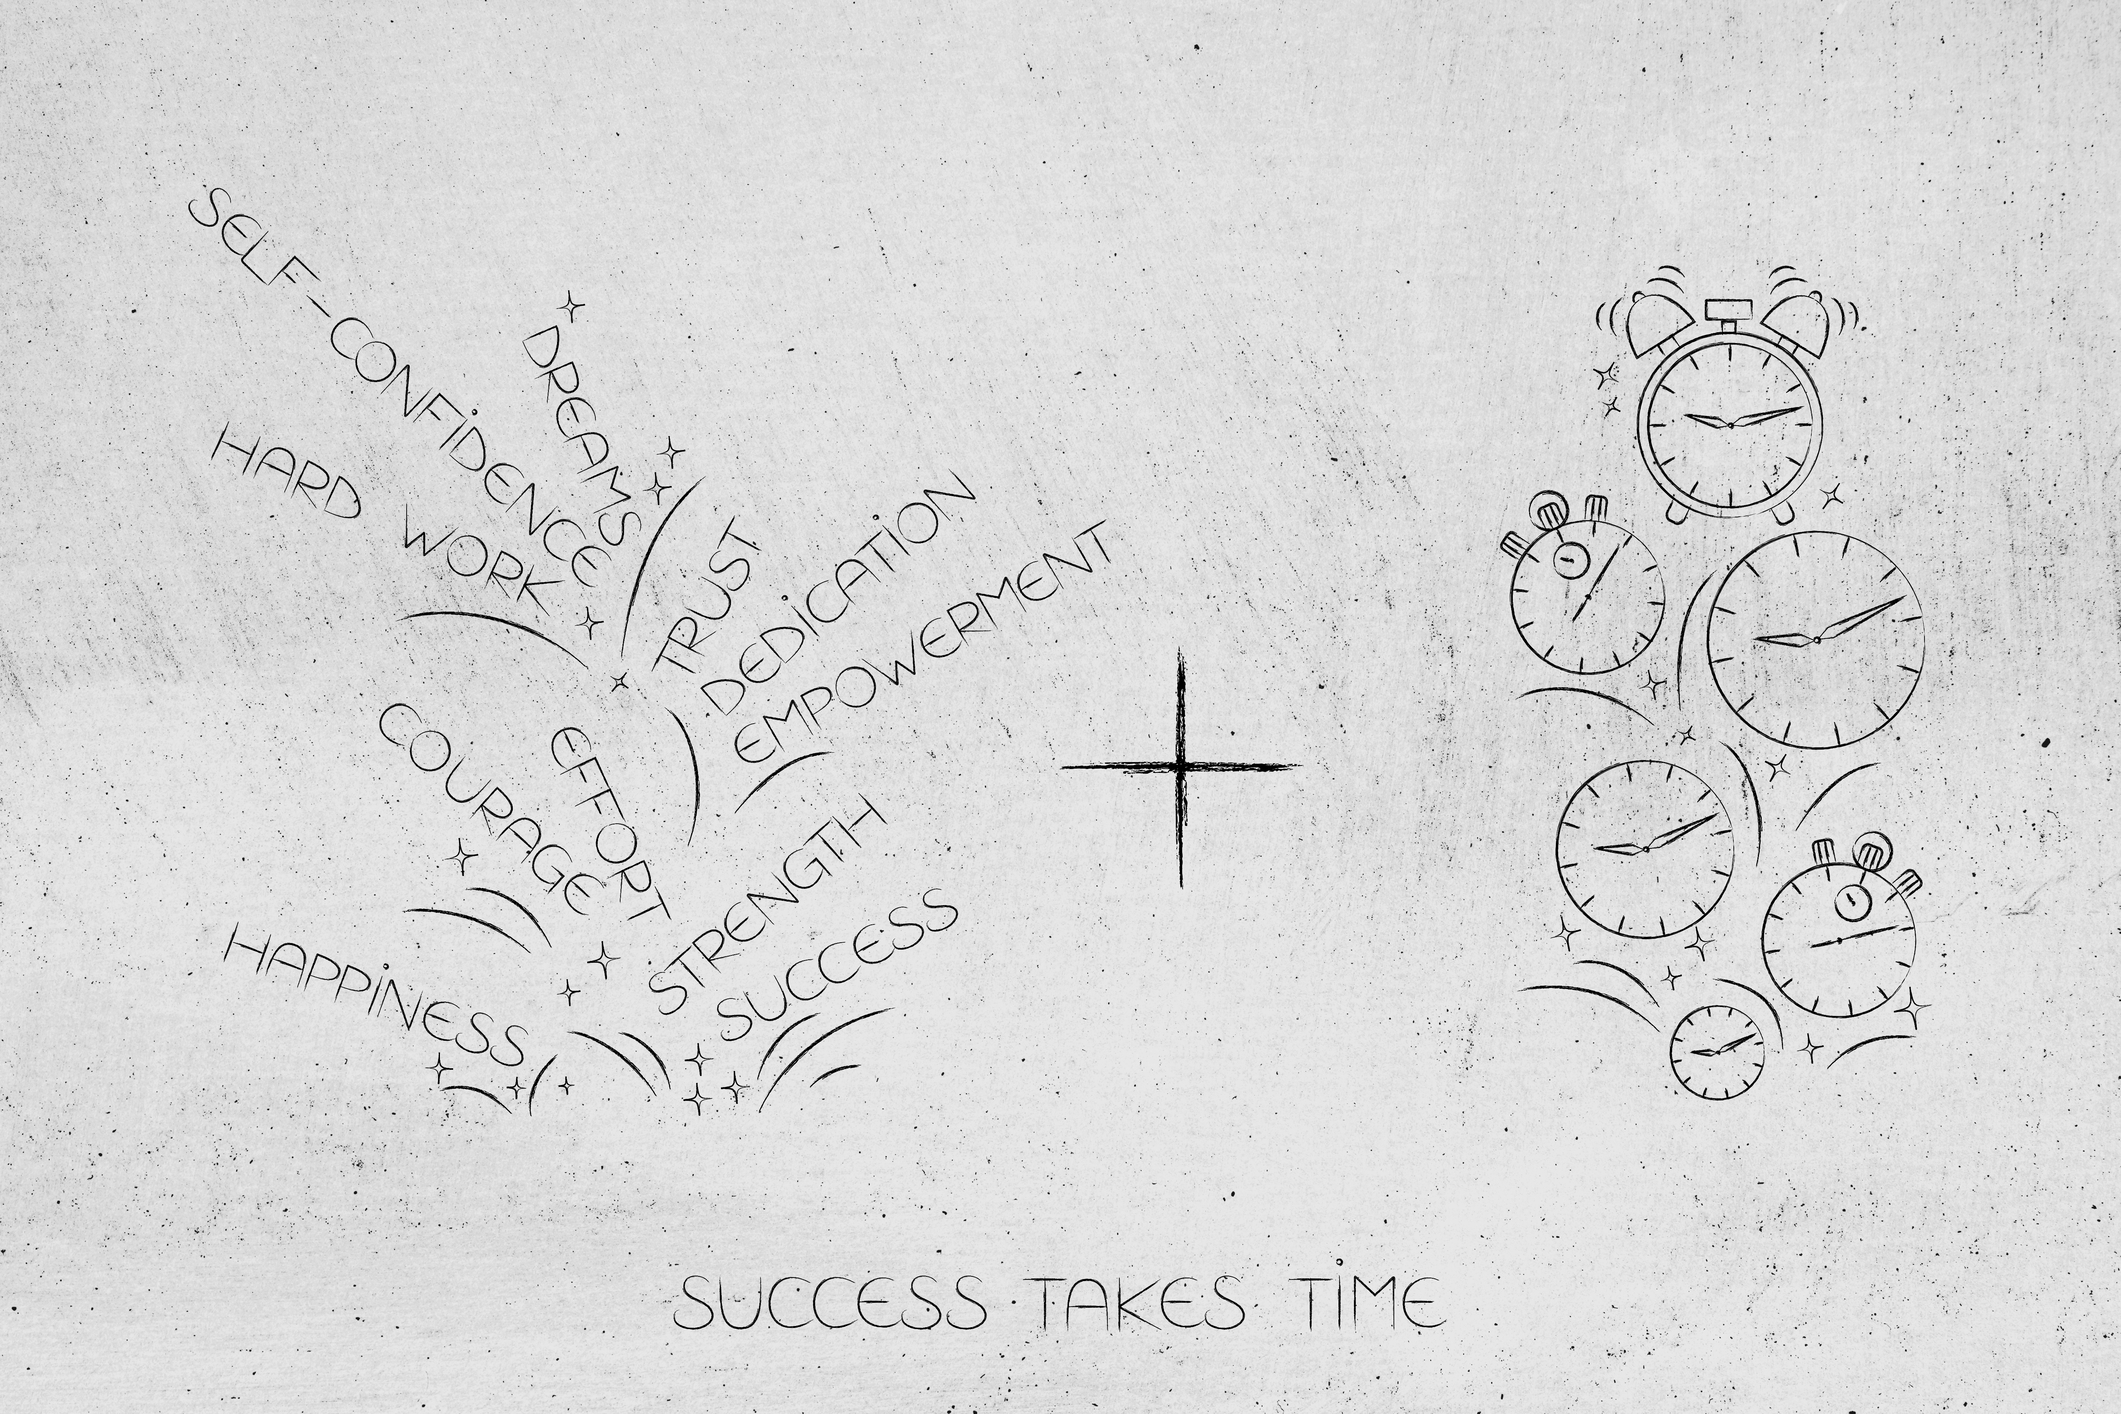 Success takes time